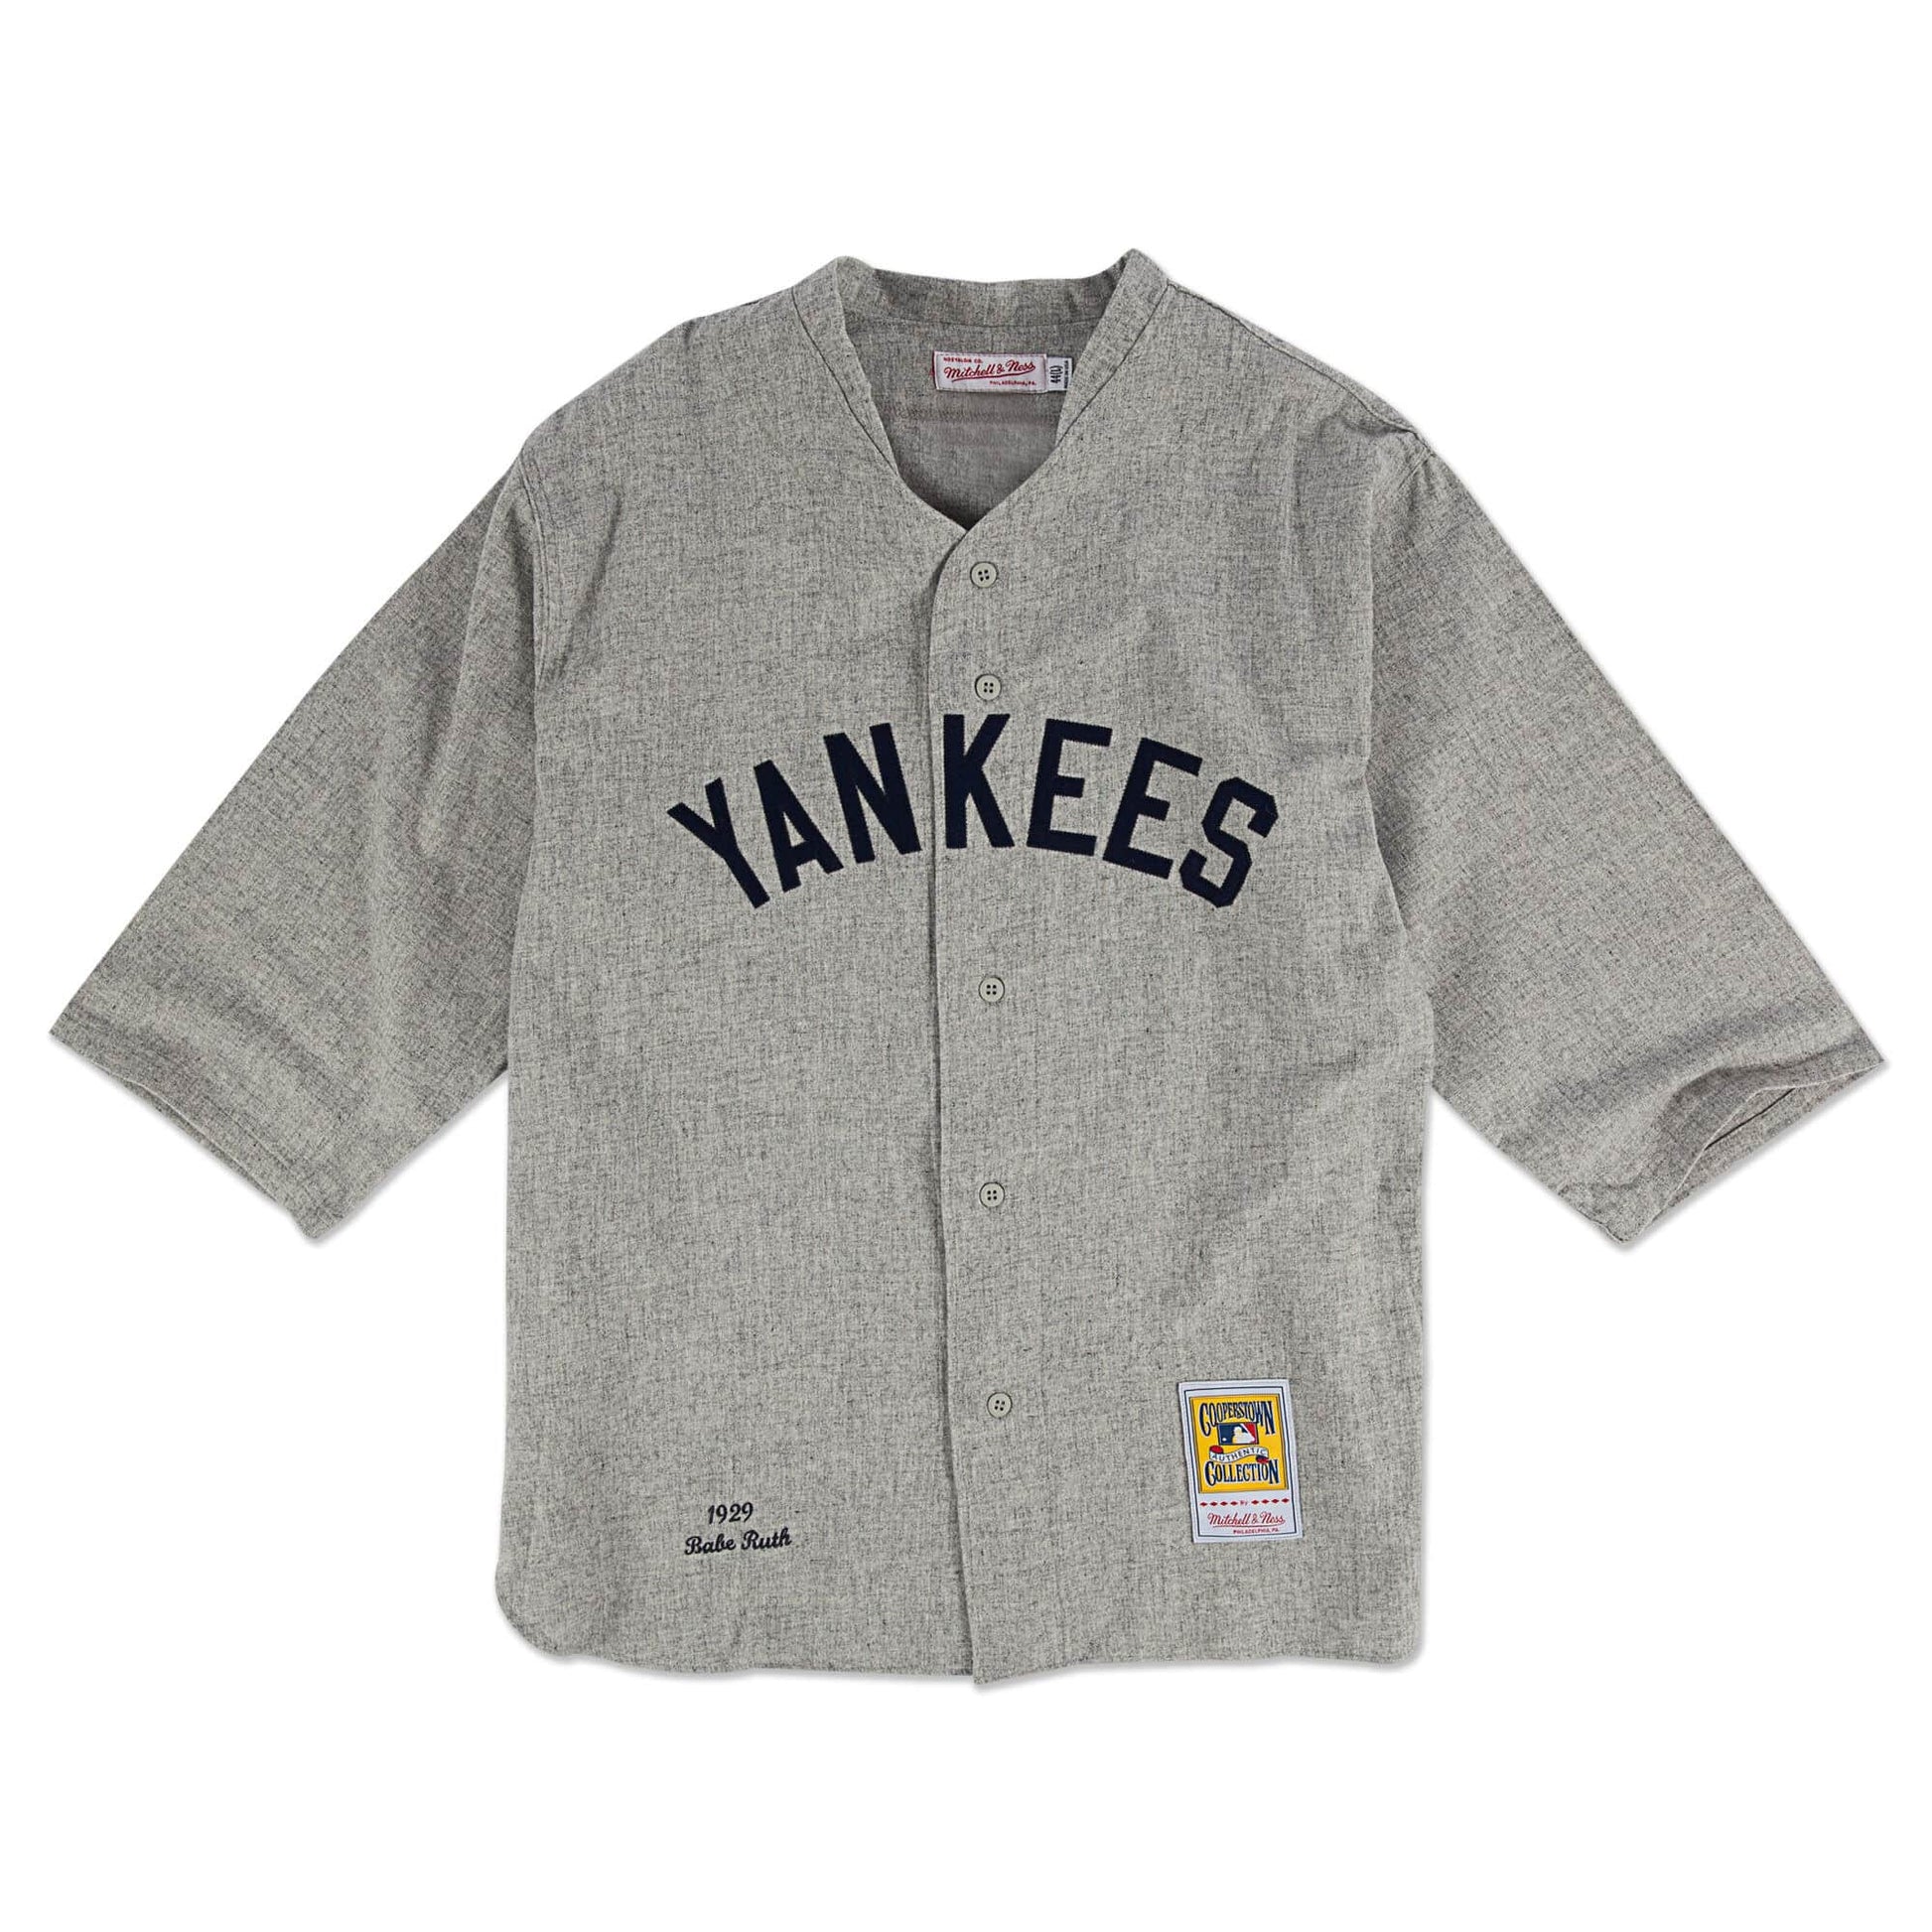 Authentic Jersey New York Yankees Road 1929 Babe Ruth – Jersey World Wide  Shop